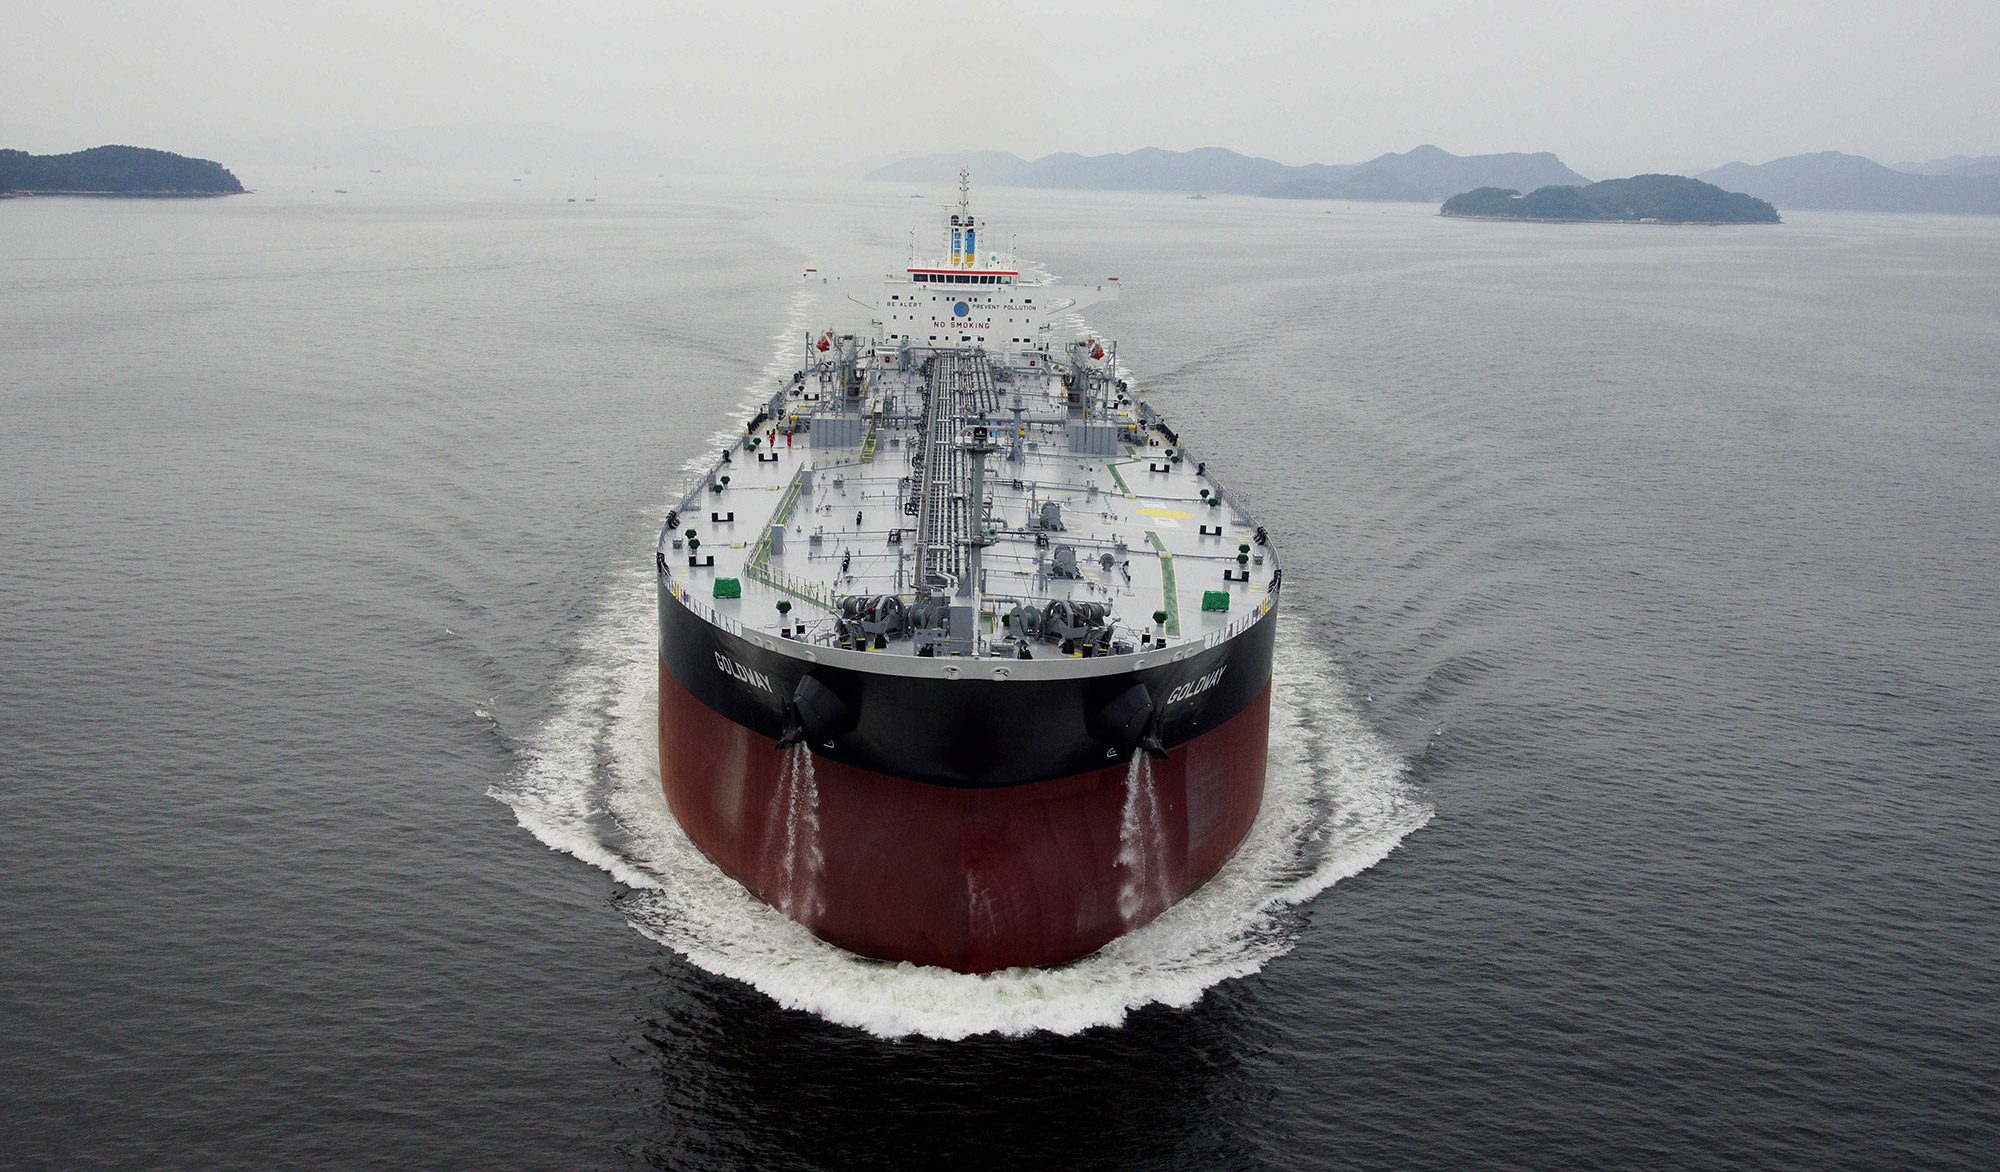 Eastern Pacific Shipping Seeks to Retrofit Tankers to Methanol and Ammonia Fuel